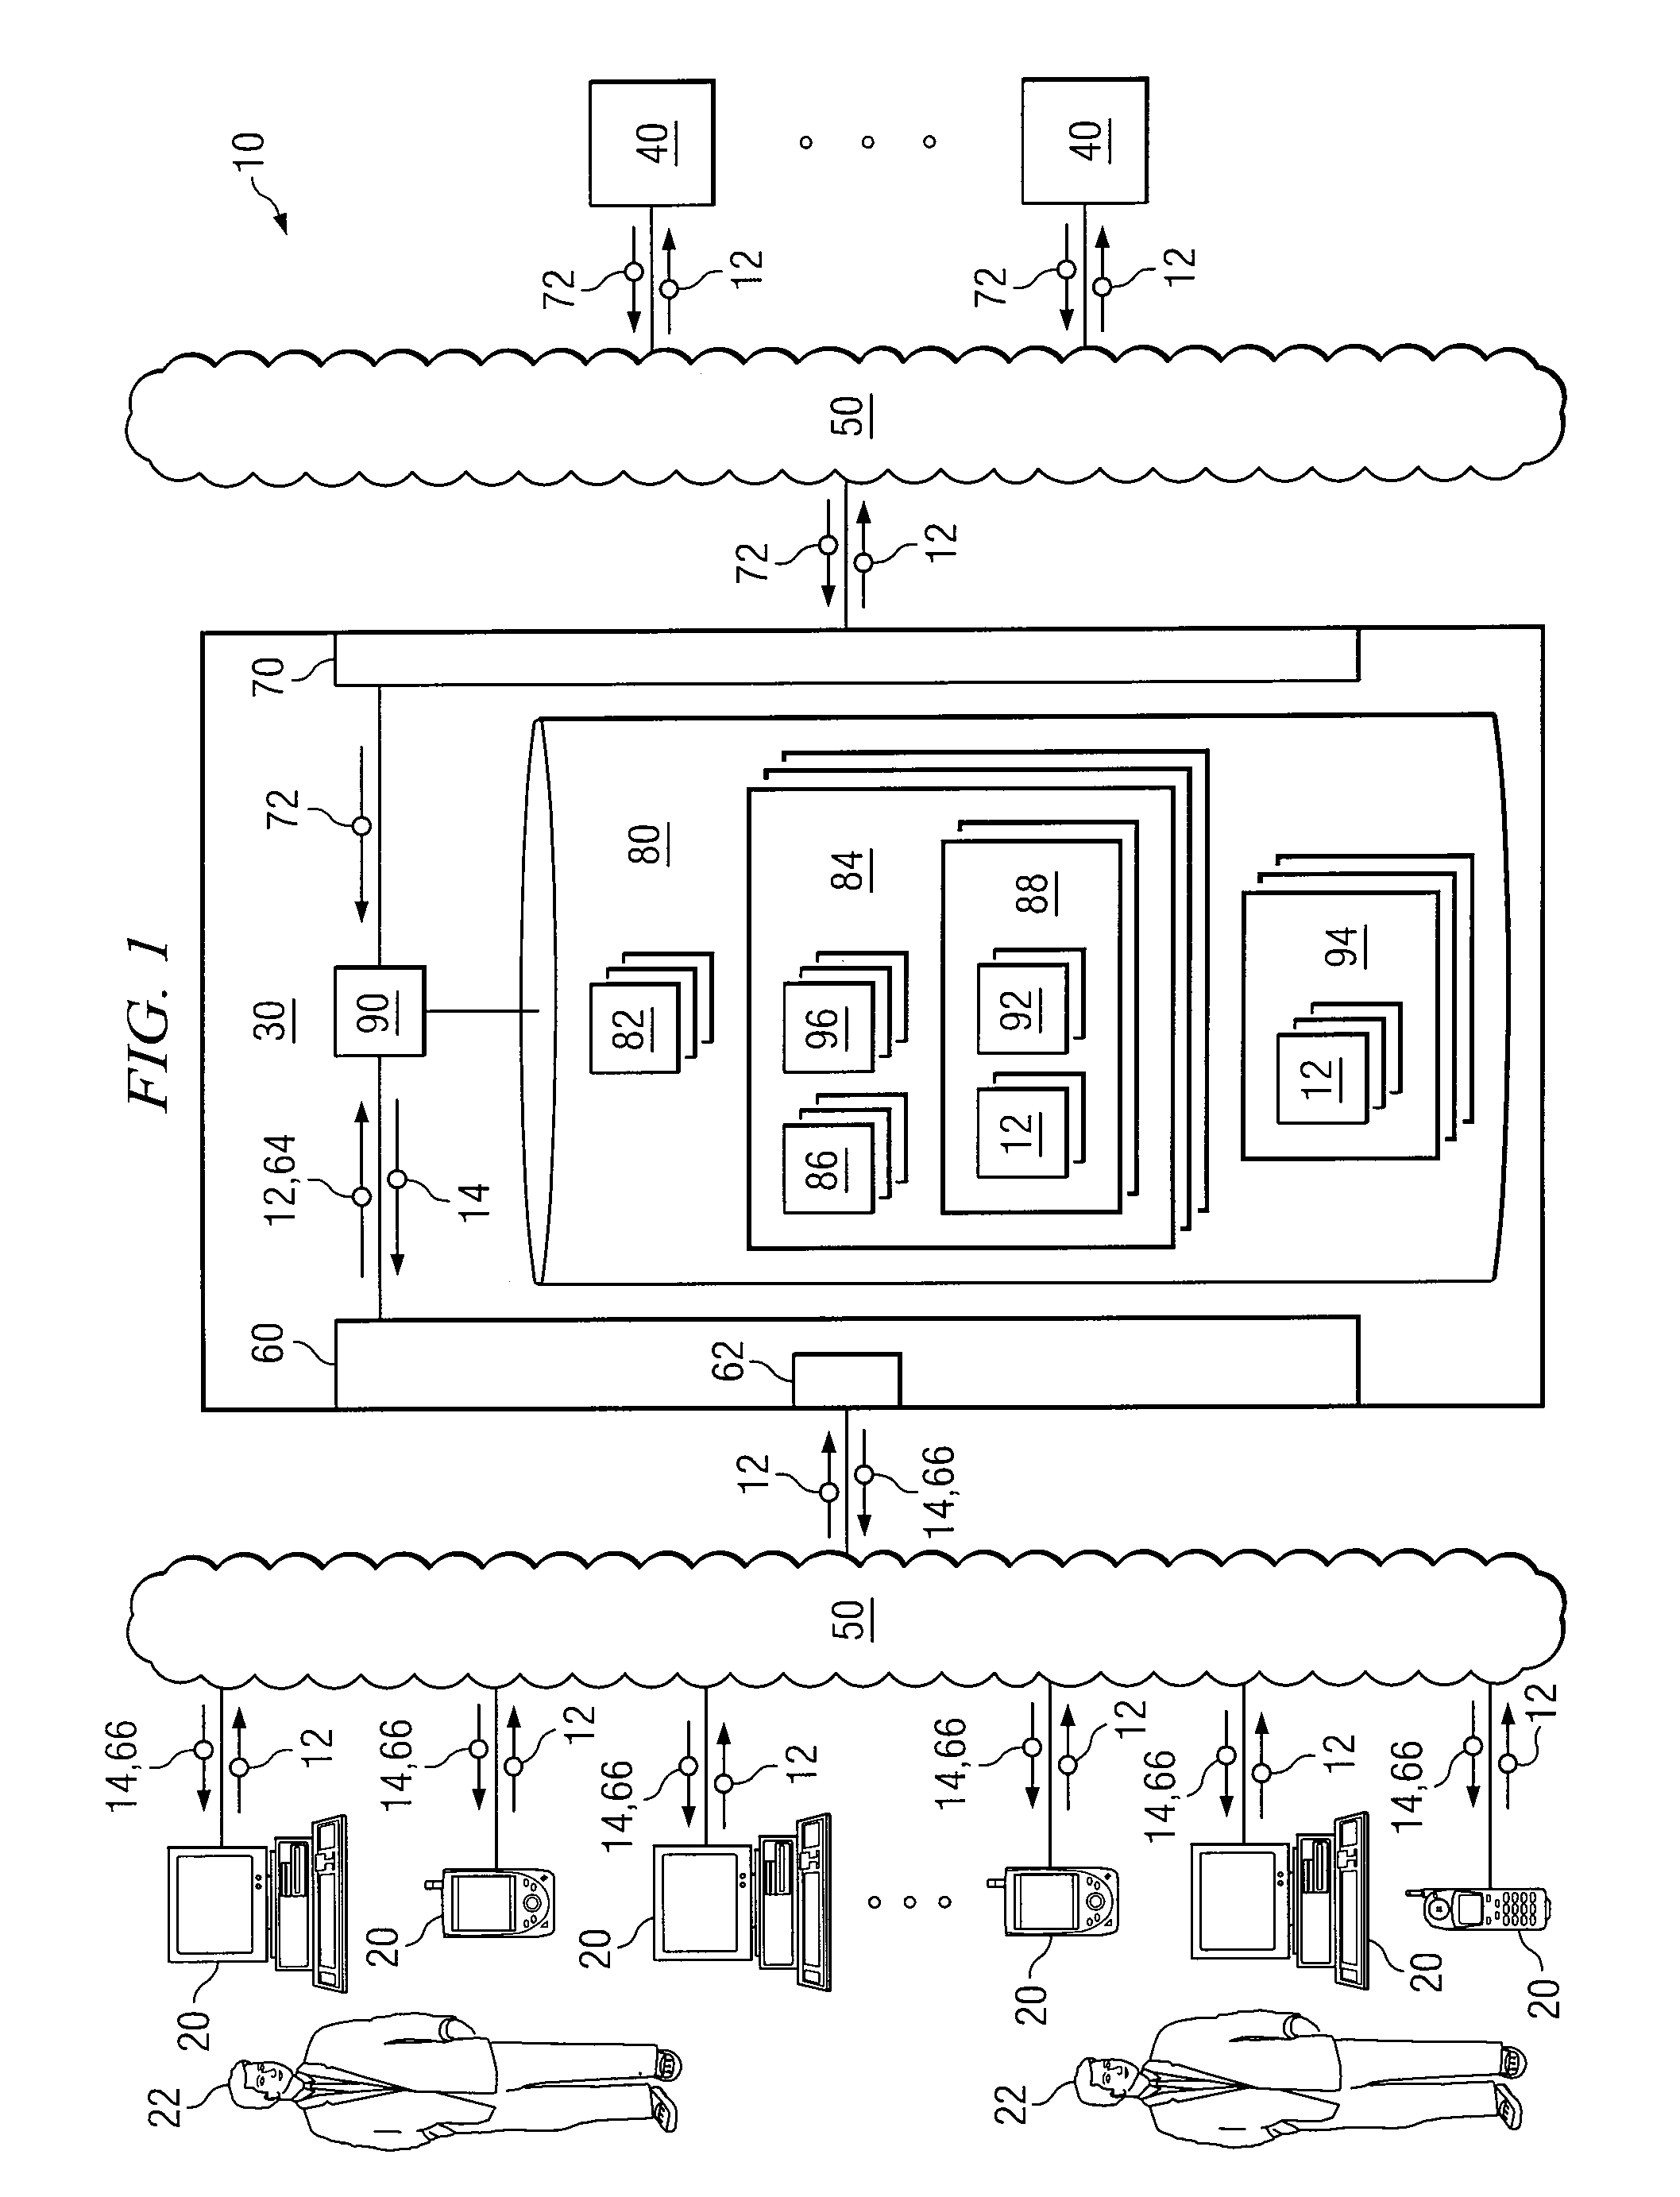 System and Method for Error Detection and Recovery in an Electronic Trading System